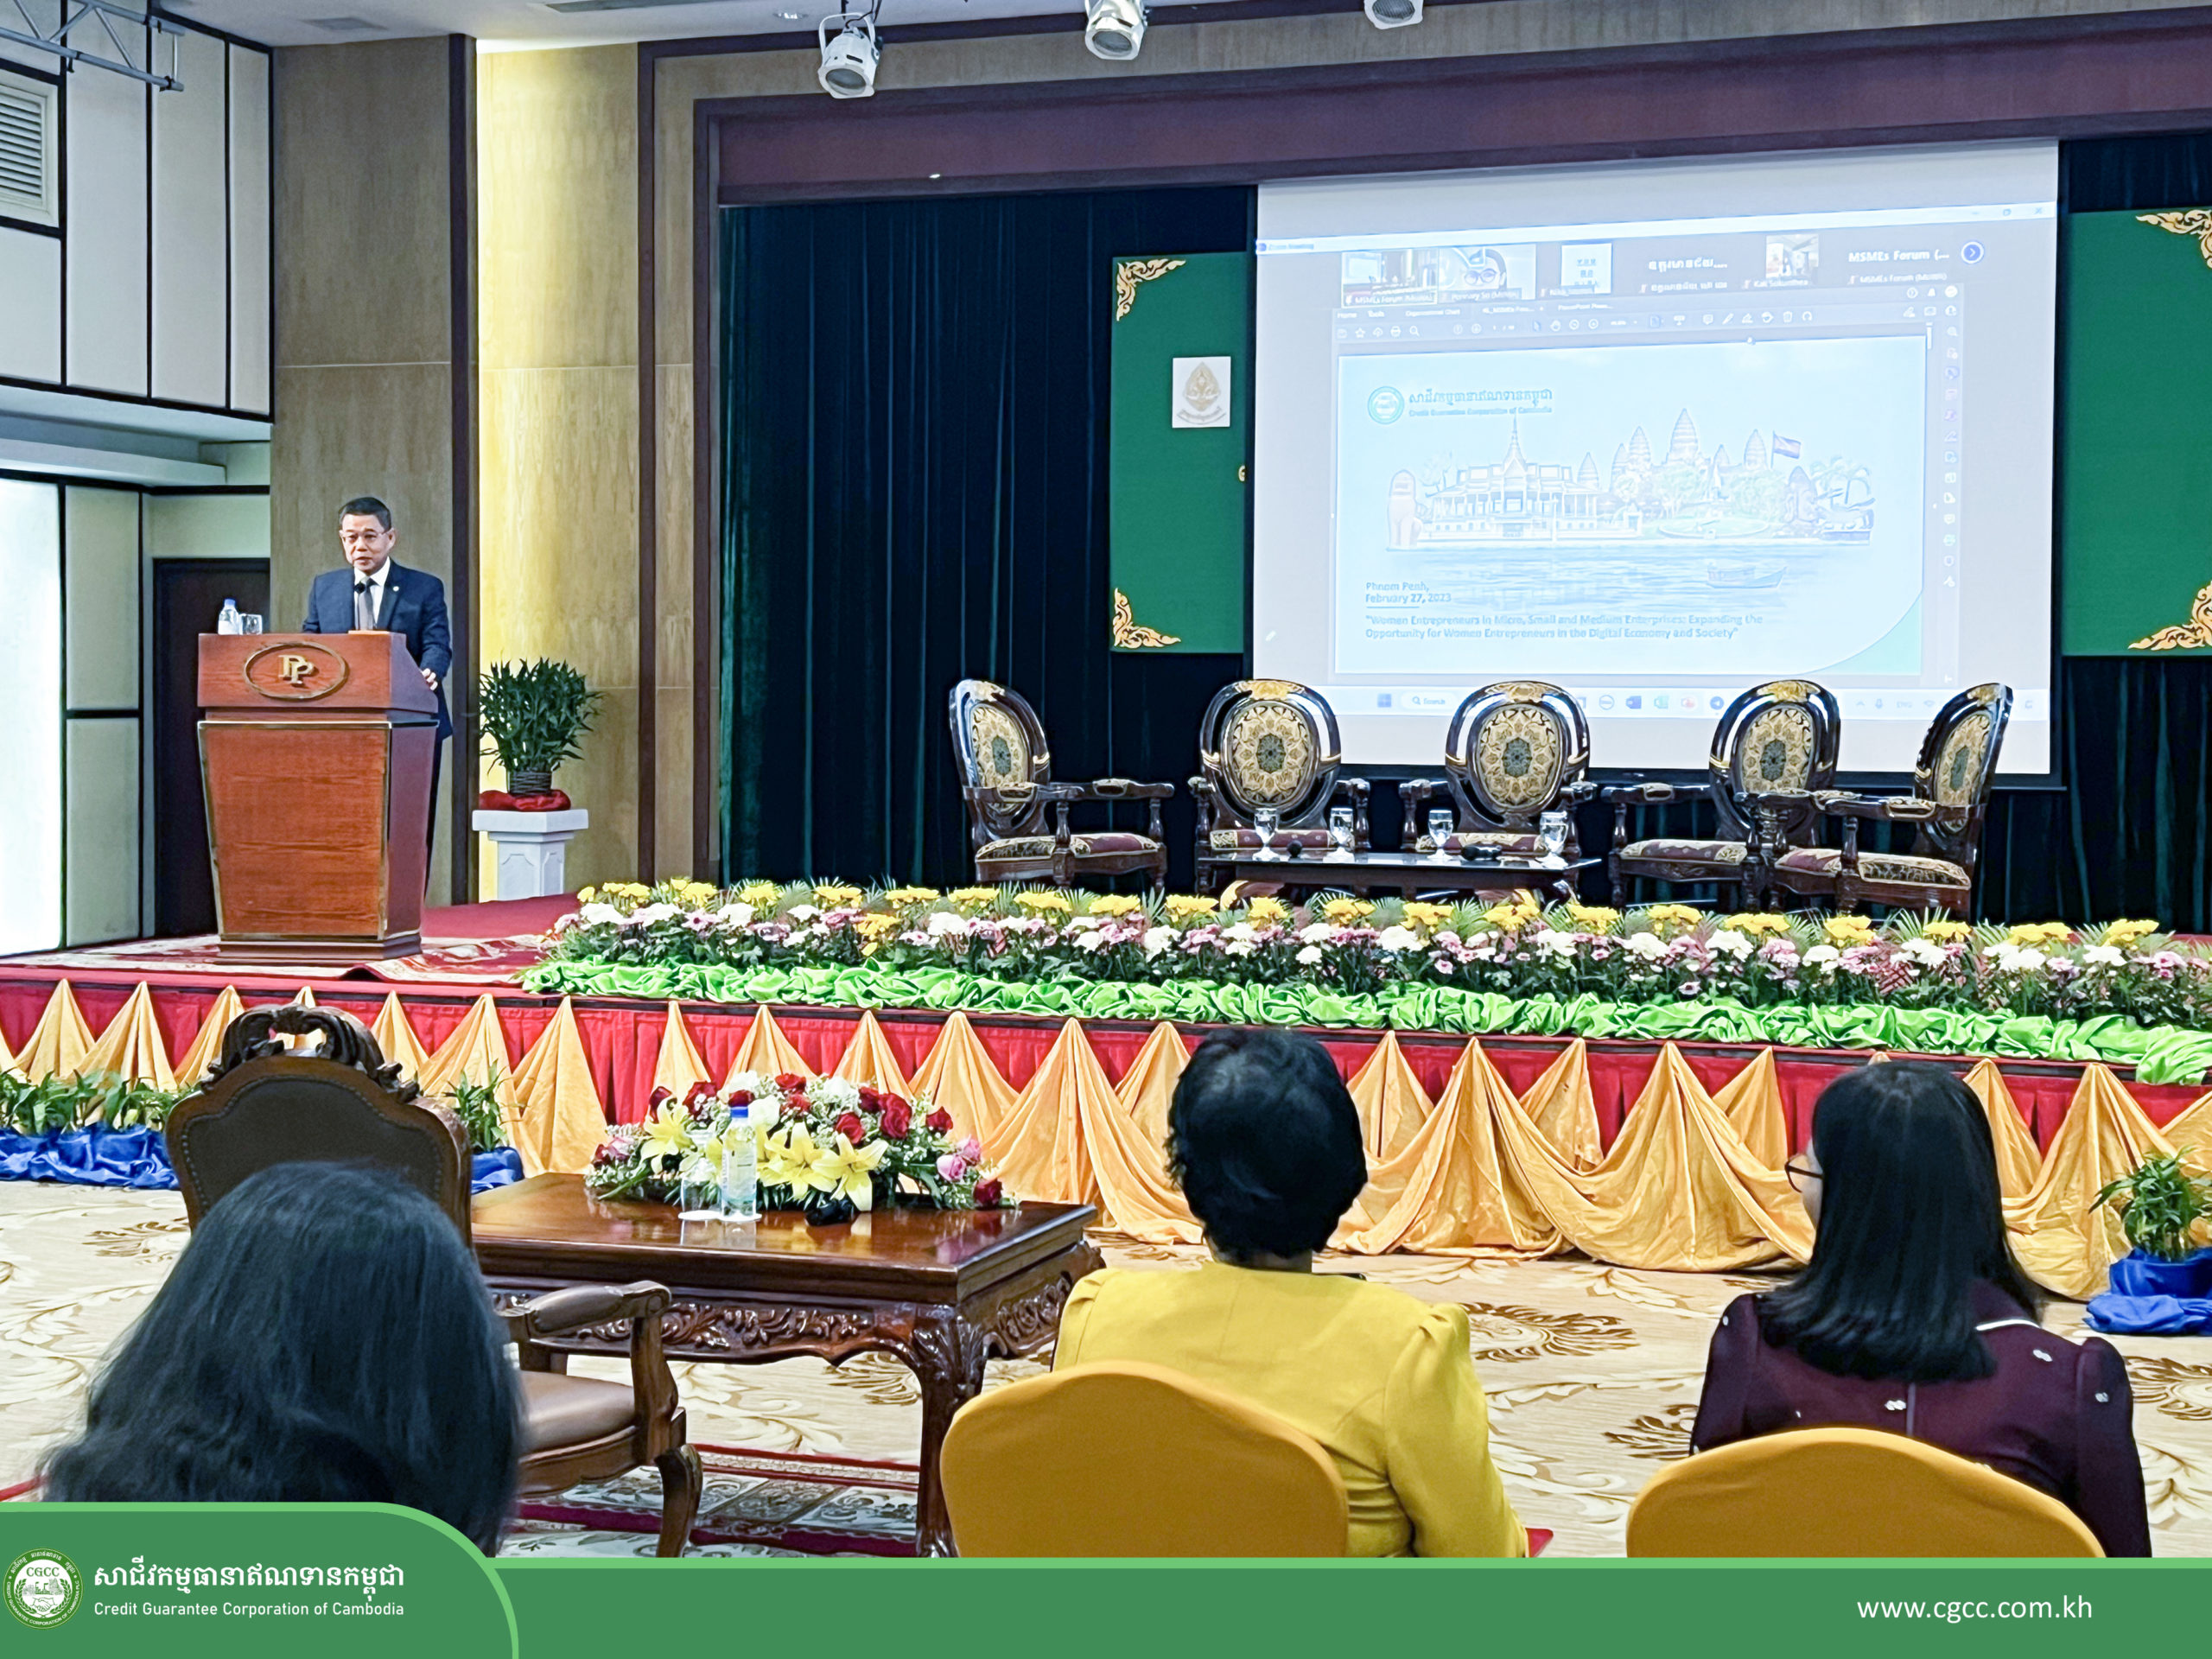 CGCC in the Seminar on “Women Entrepreneurs in MSMEs" of Ministry of Women Affairs